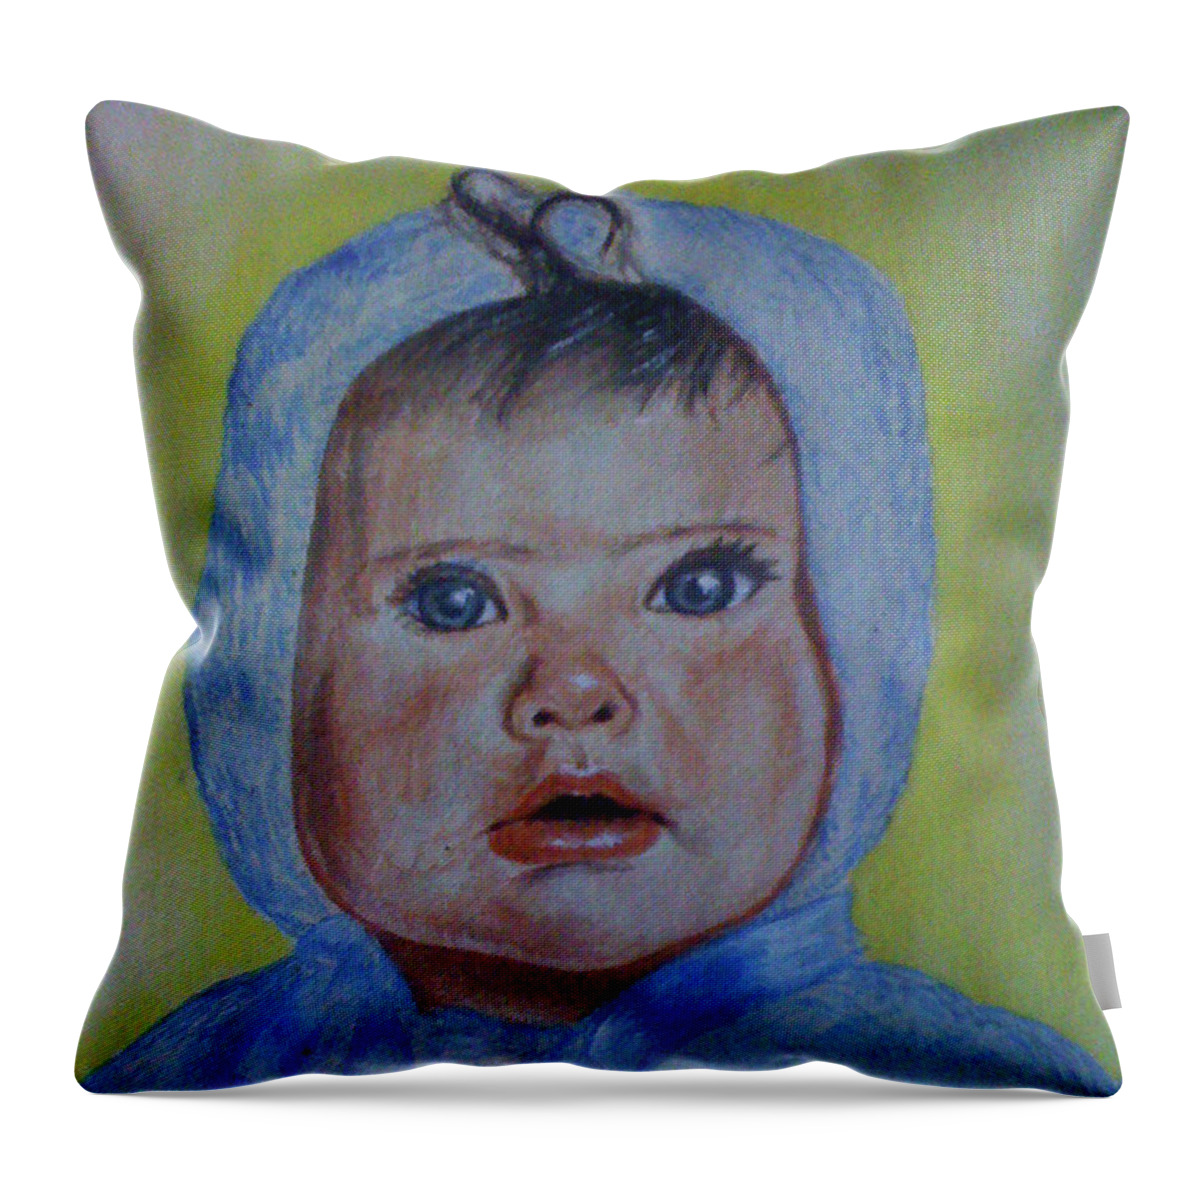 Baby Throw Pillow featuring the painting Baby Portrait by Remy Francis